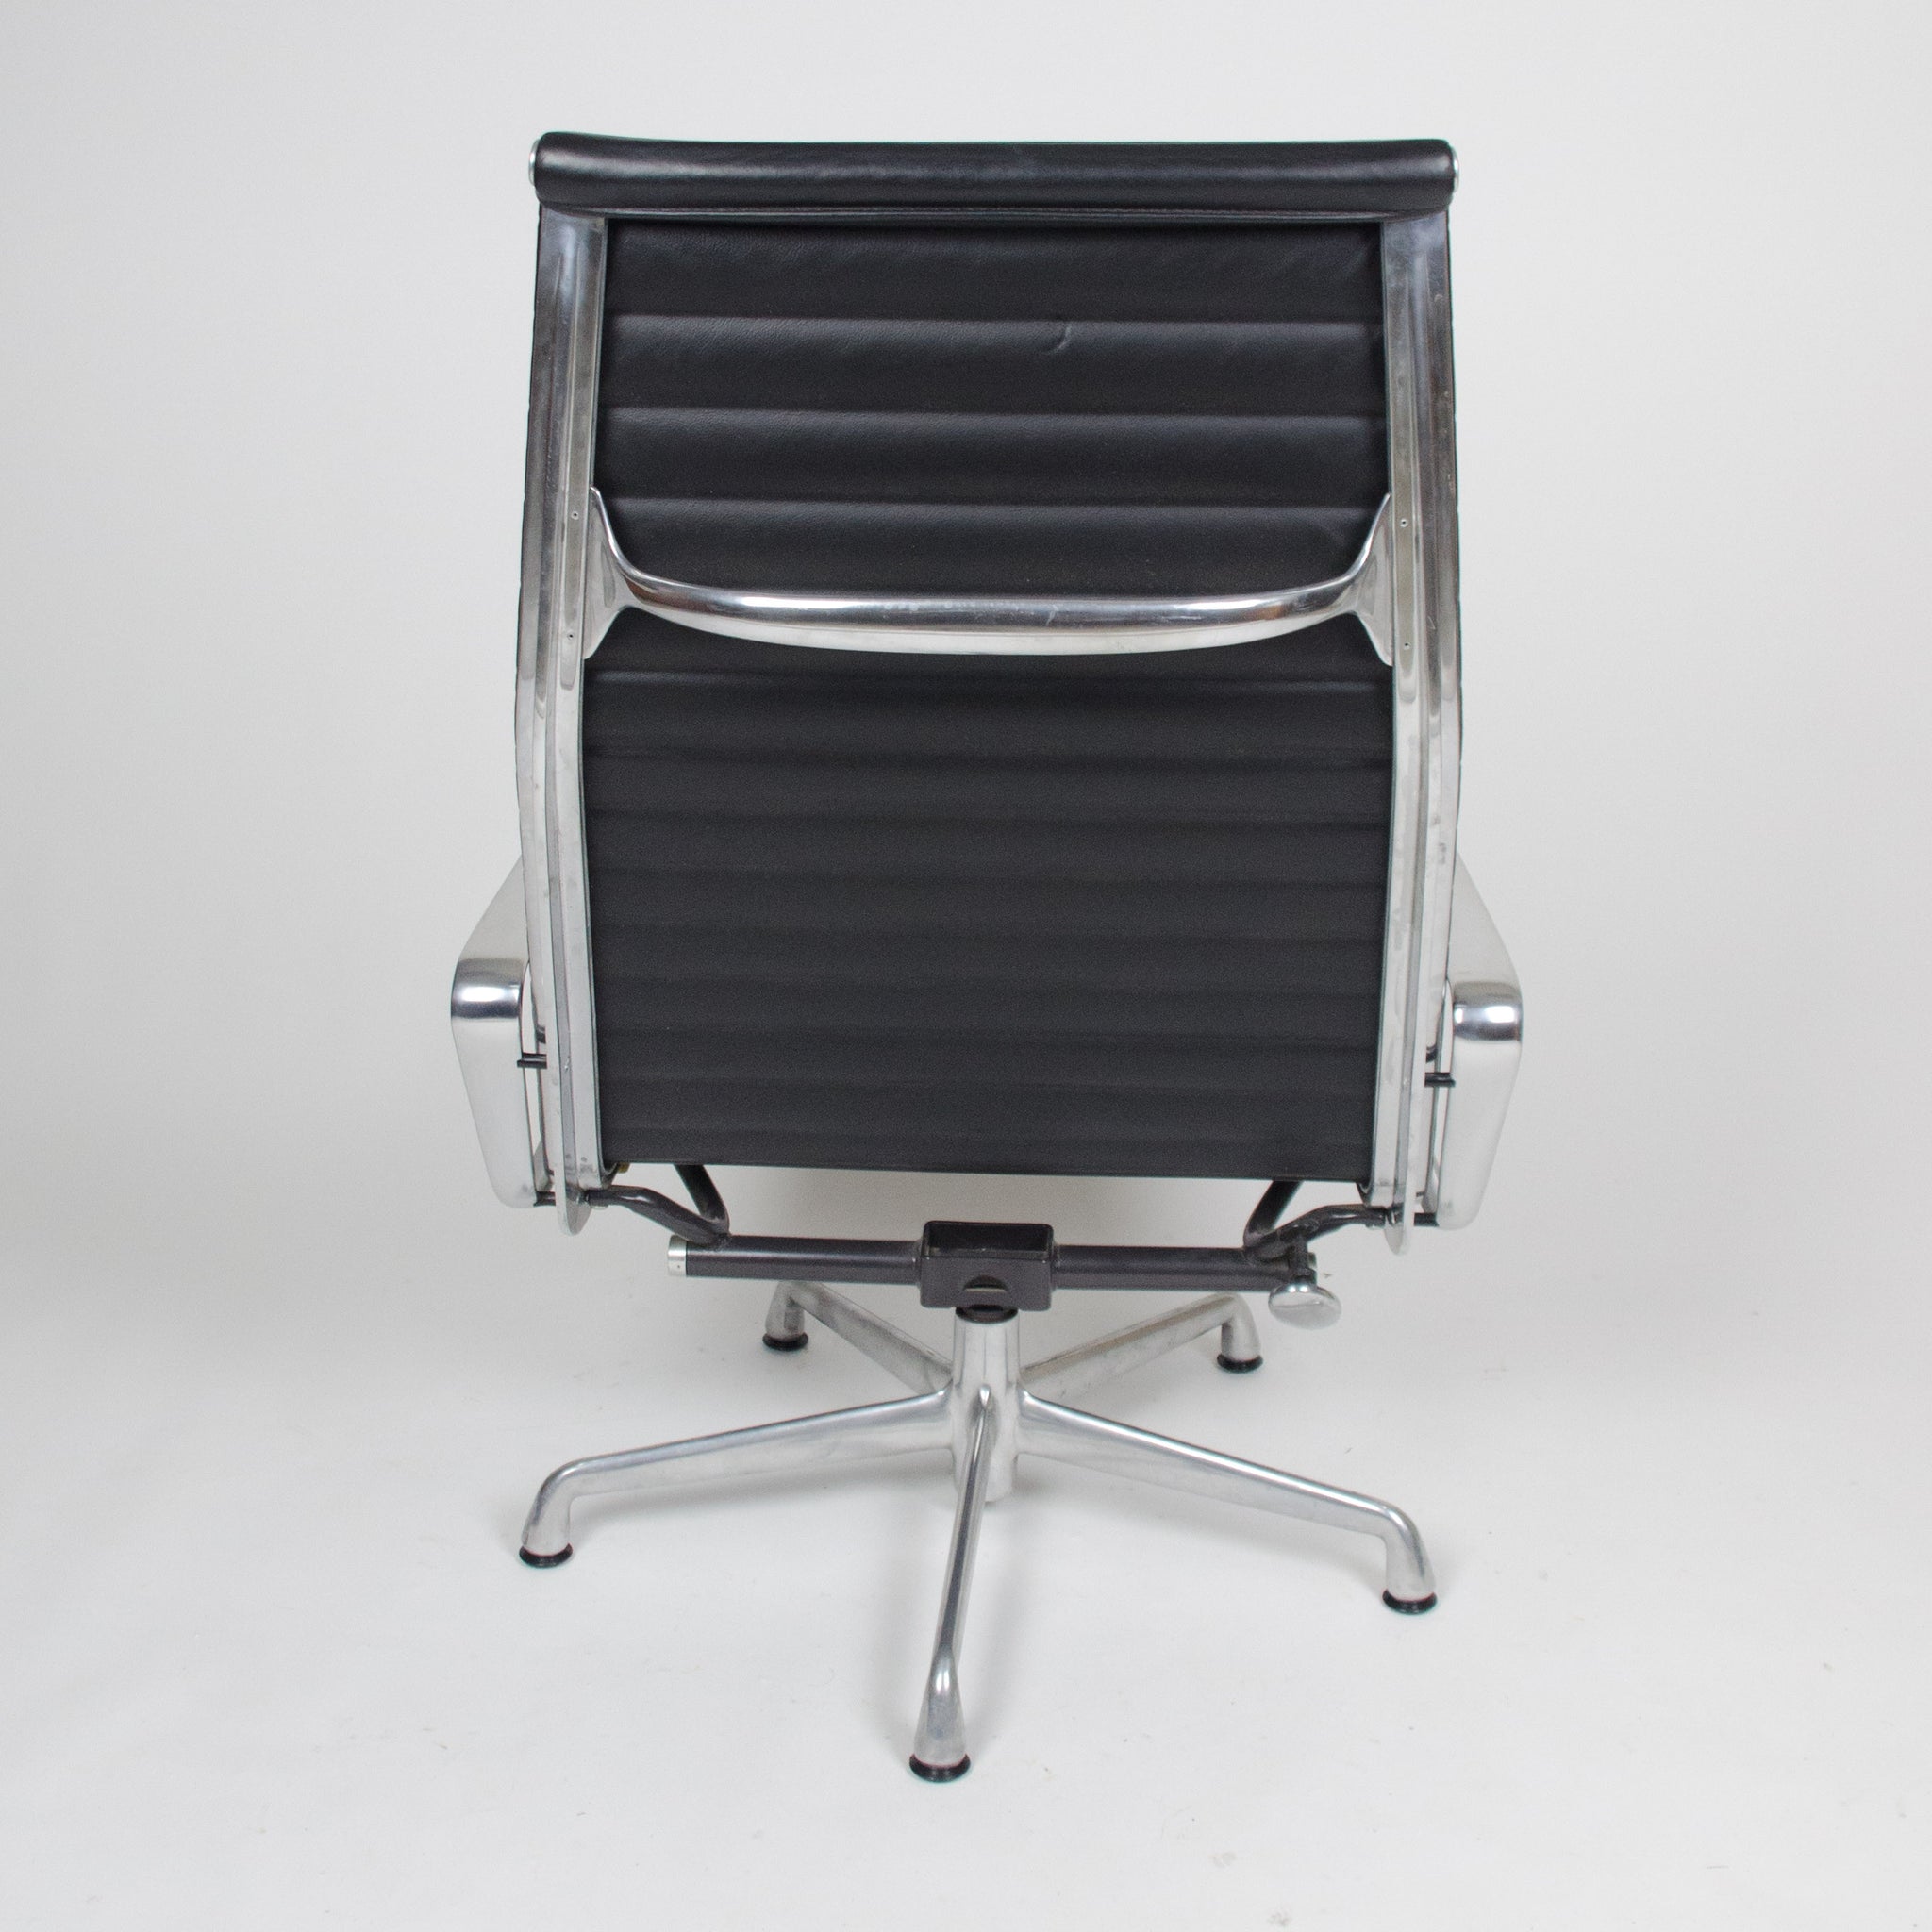 SOLD Eames Herman Miller High Back Aluminum Lounge Chair with Ottoman Black Leather